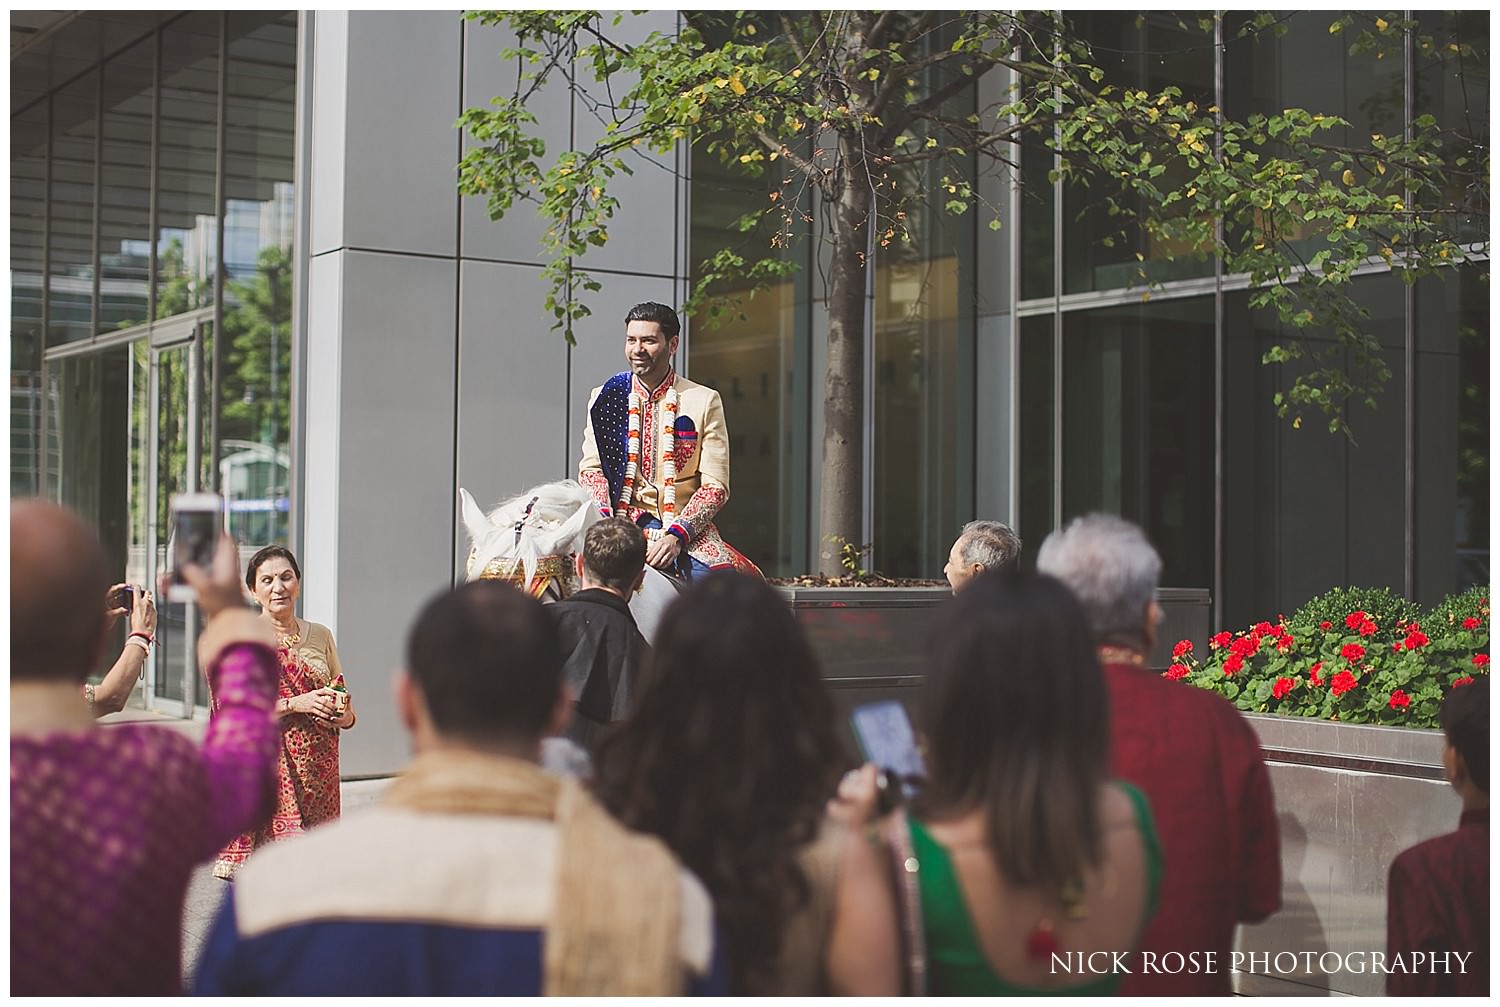  Groom on a horse getting ready for his Hindu wedding Baraat in London 